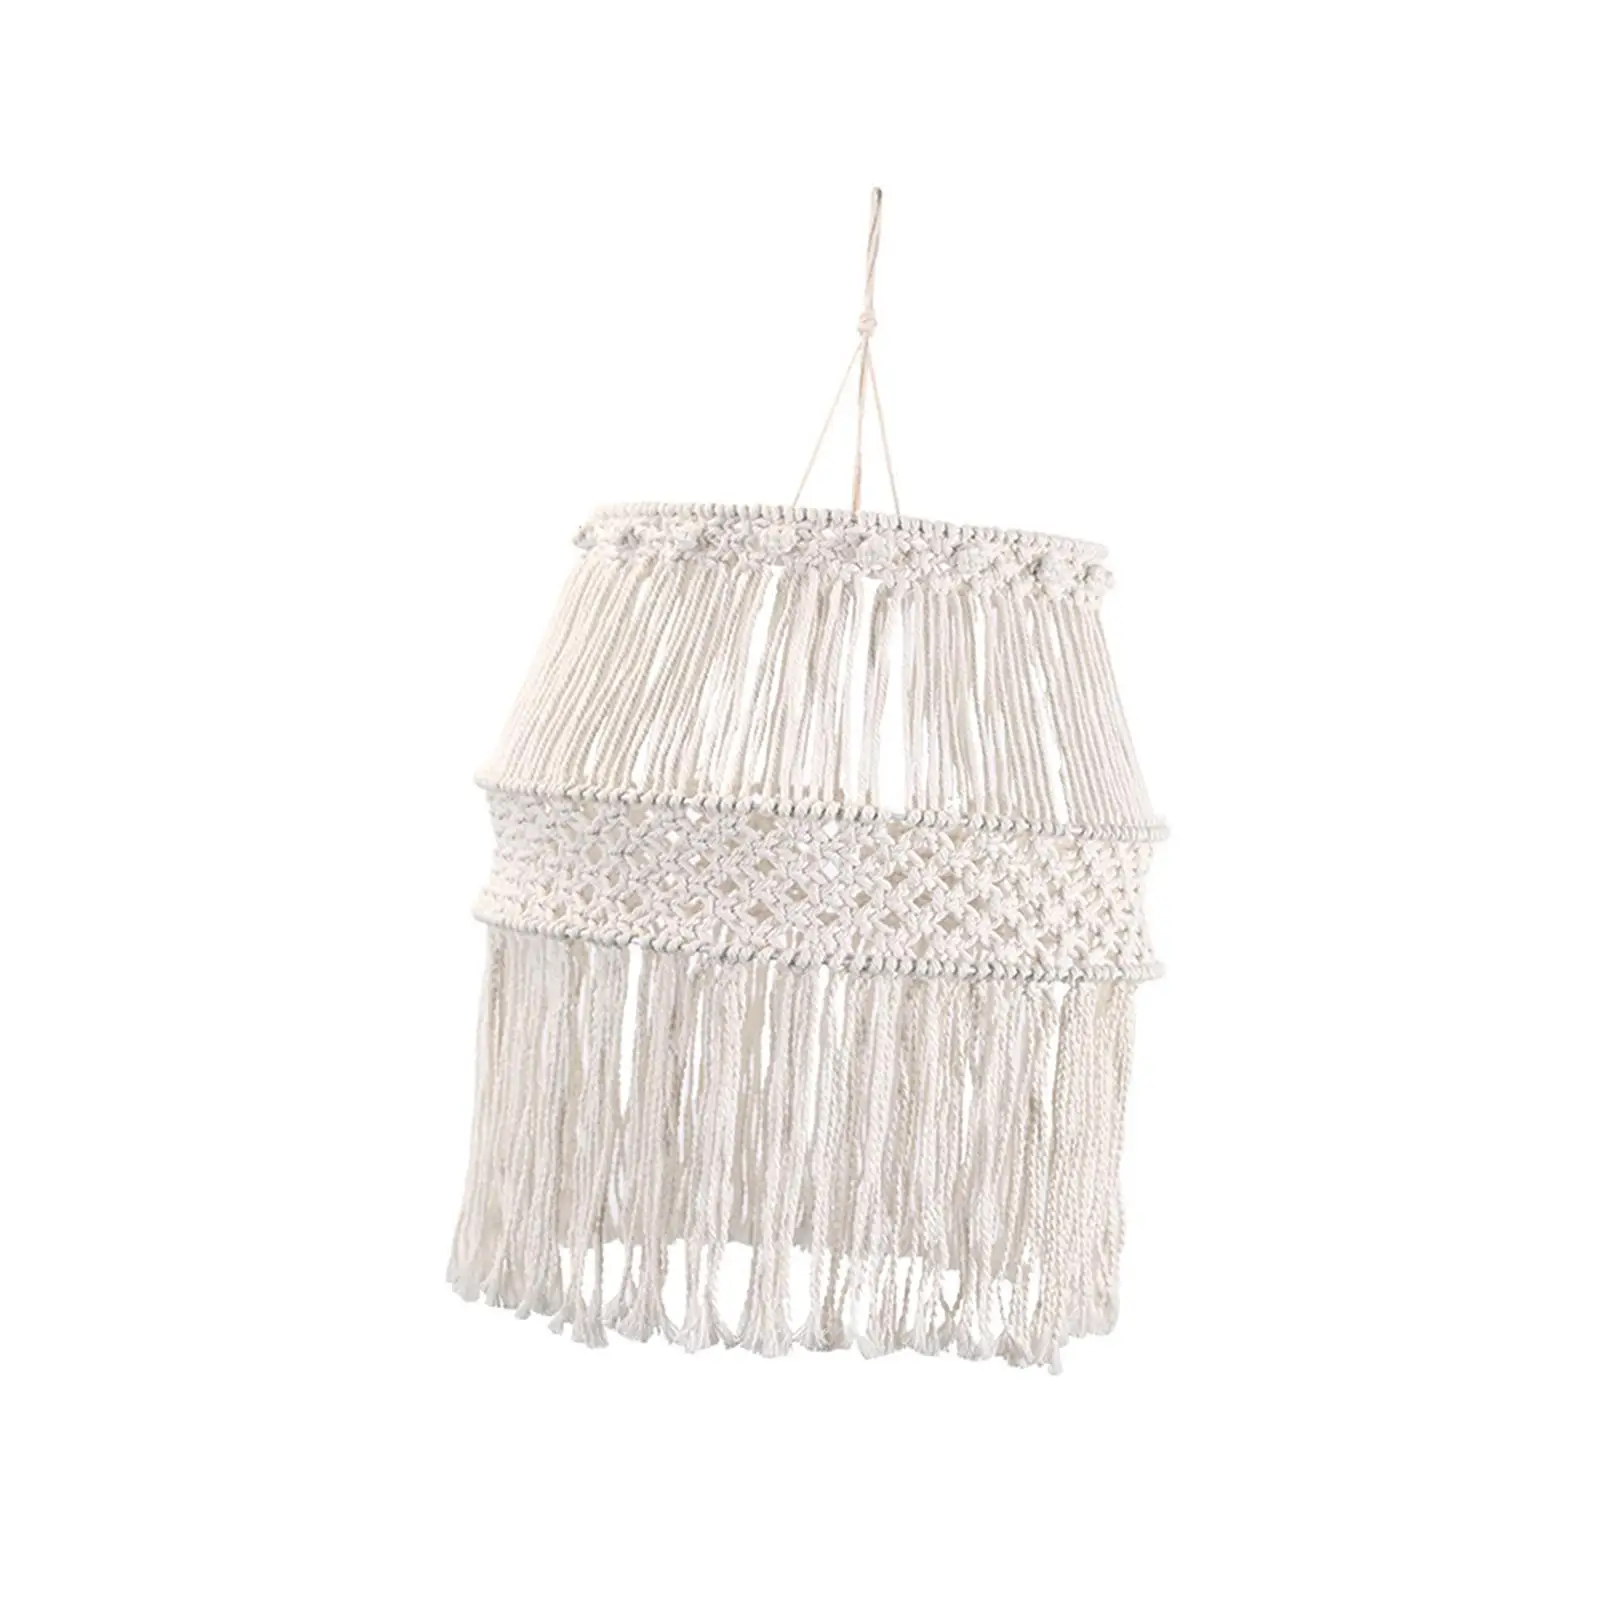 Macrame Lamp Shade Bohemian Style Woven Light Cover Hanging Lampshade Pendant Light Shade Only for Living Room Party Decoration